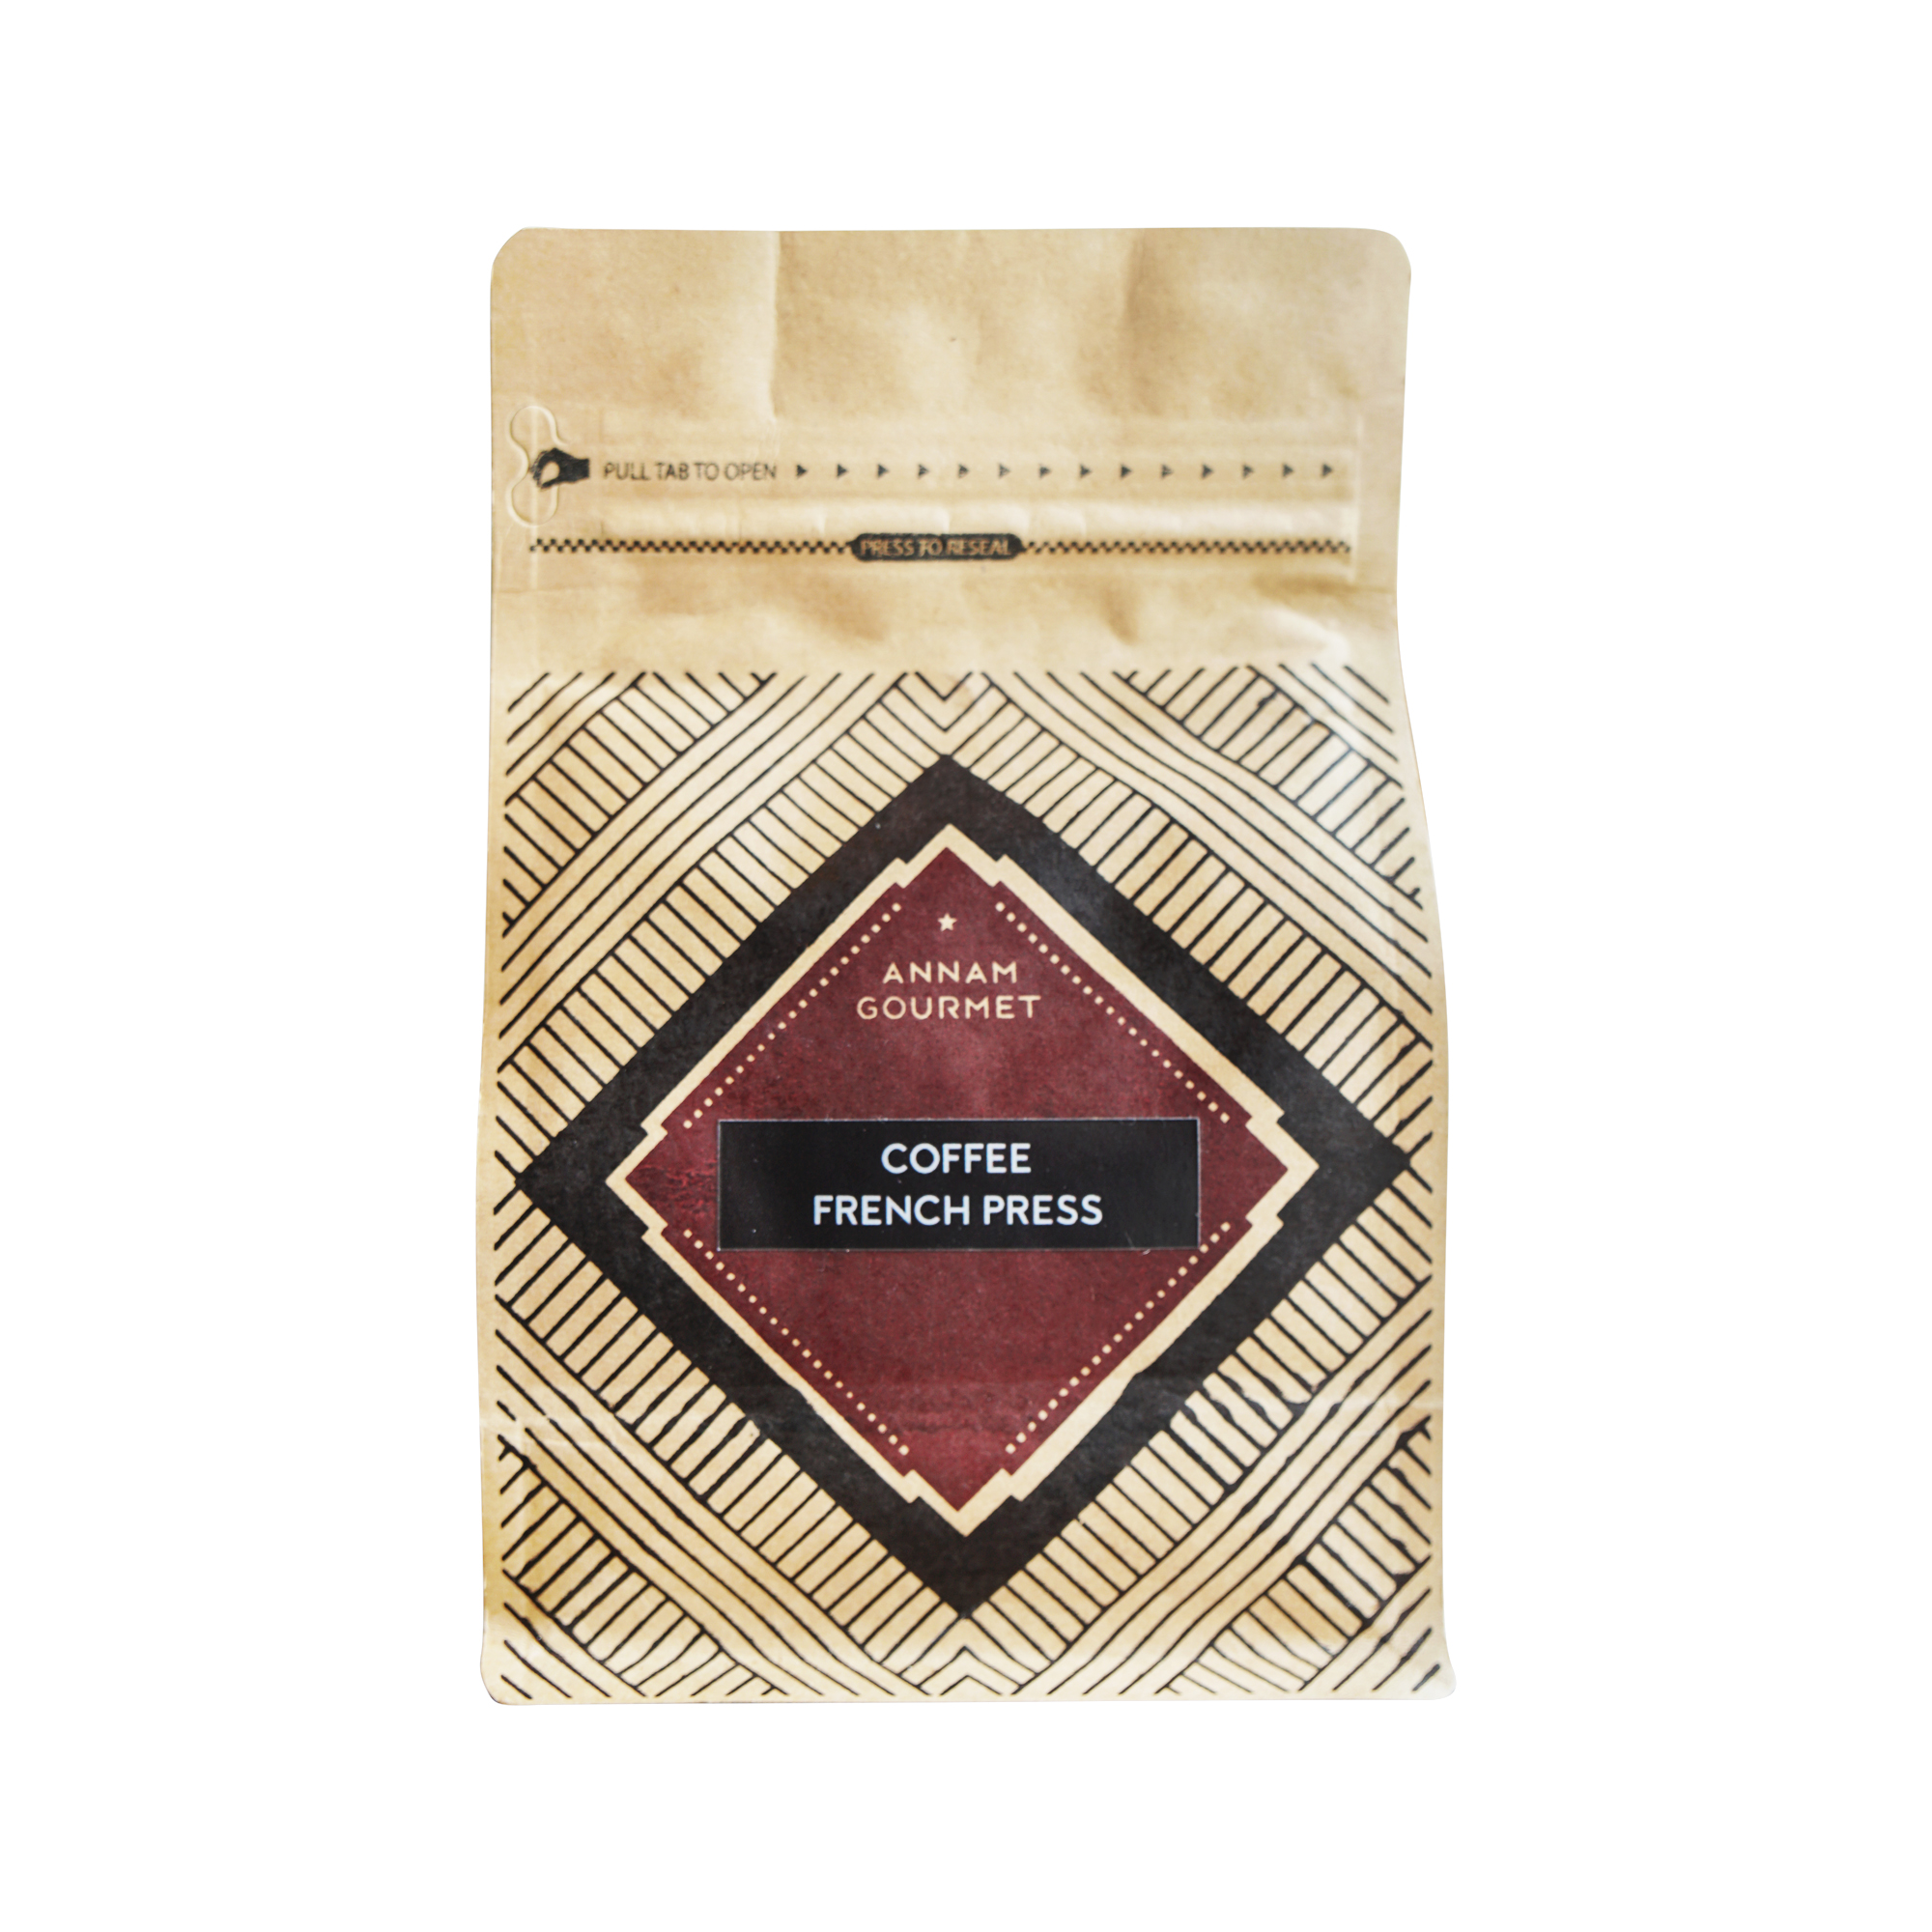 AG Signature Coffee French Press (250g)